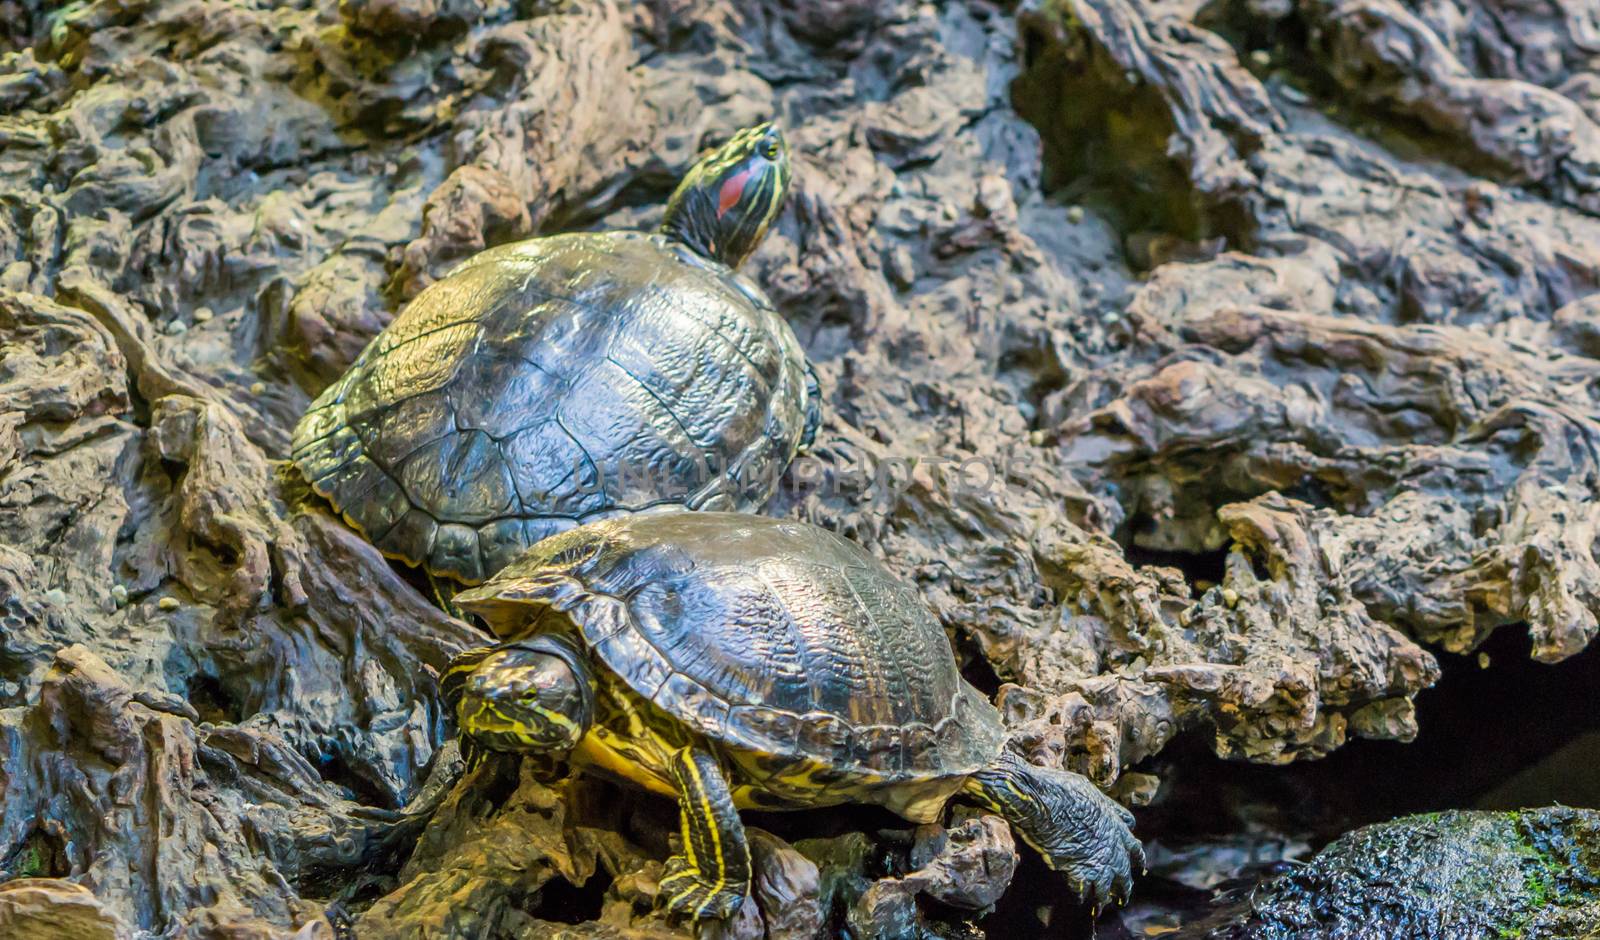 red eared slider and yellow bellied slider together in closeup, tropical reptile pets from America